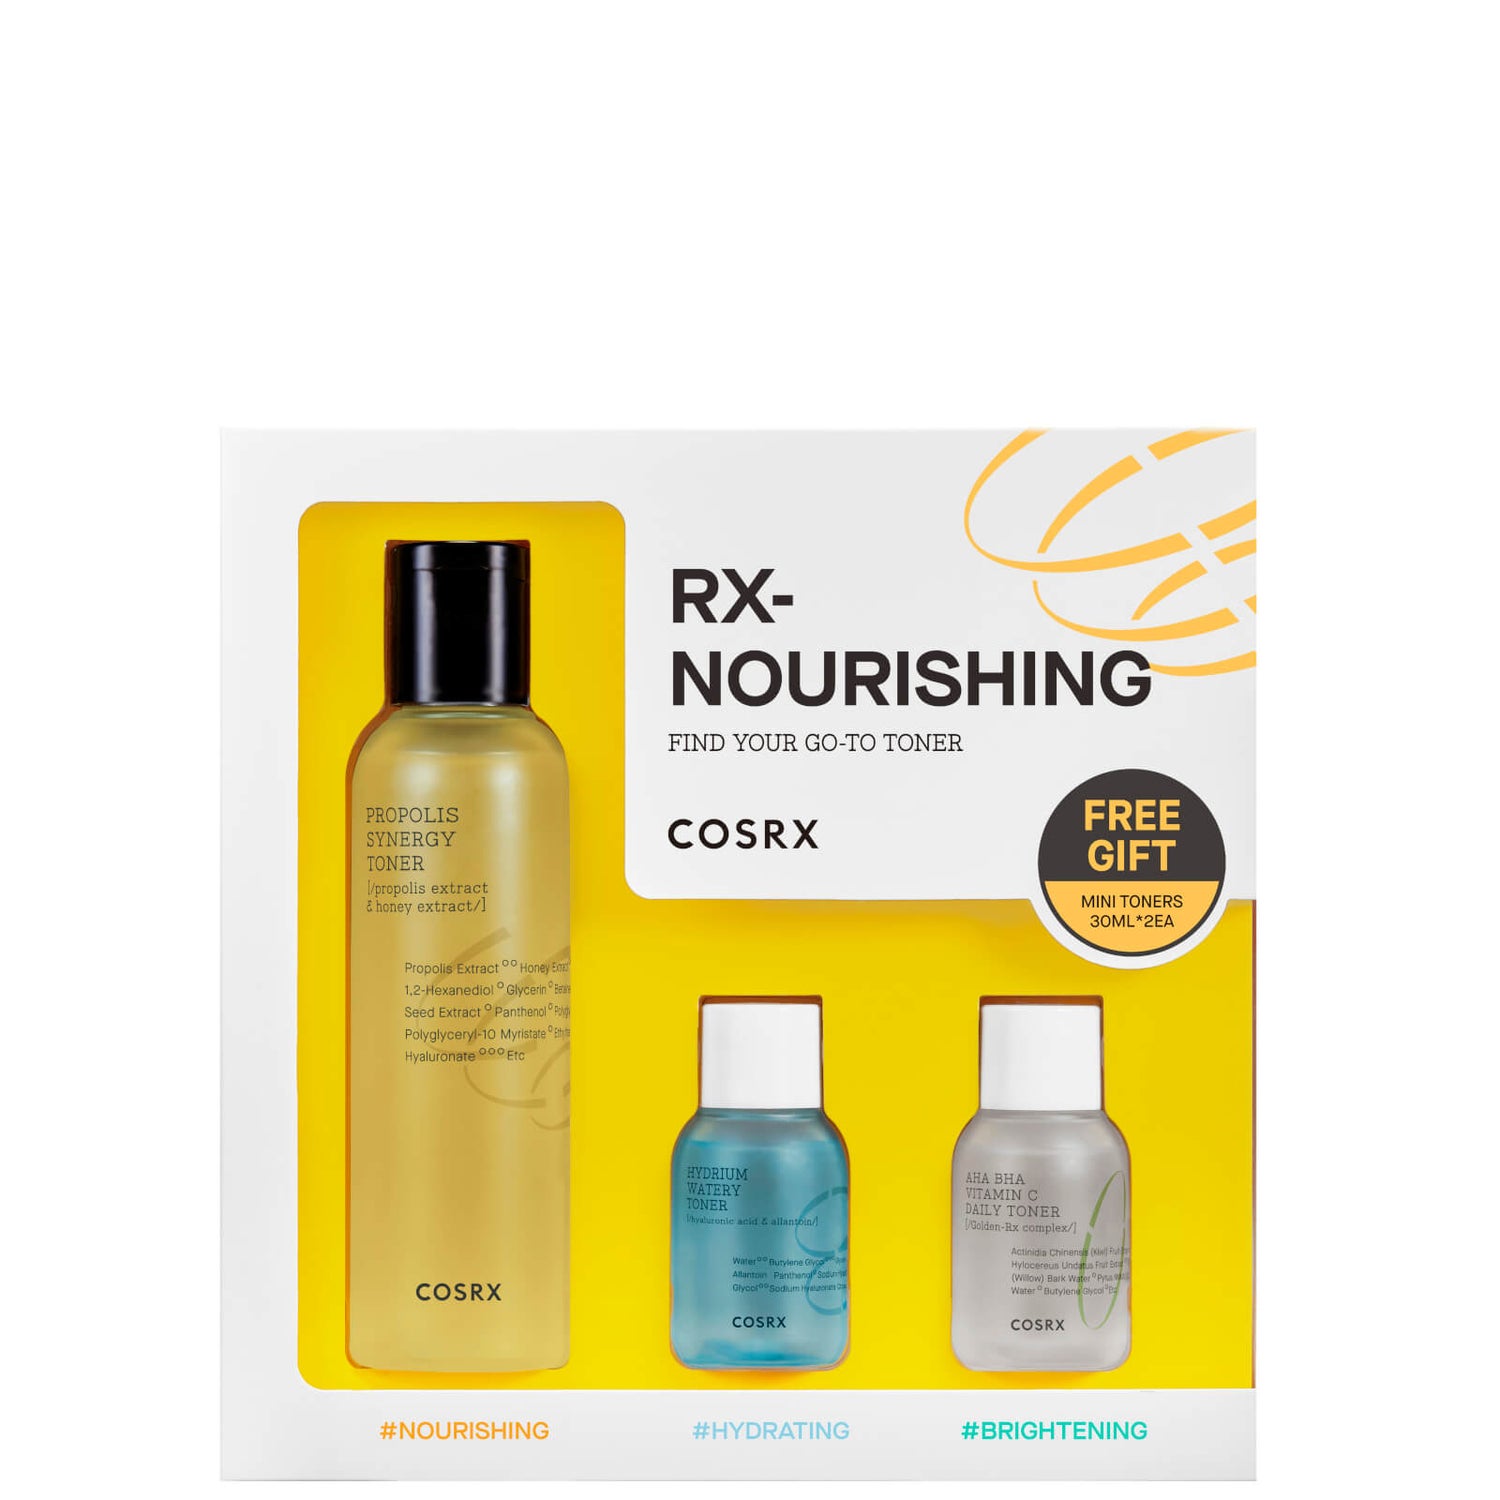 Coffret Find Your Go-To Toner RX Nourishing COSRX